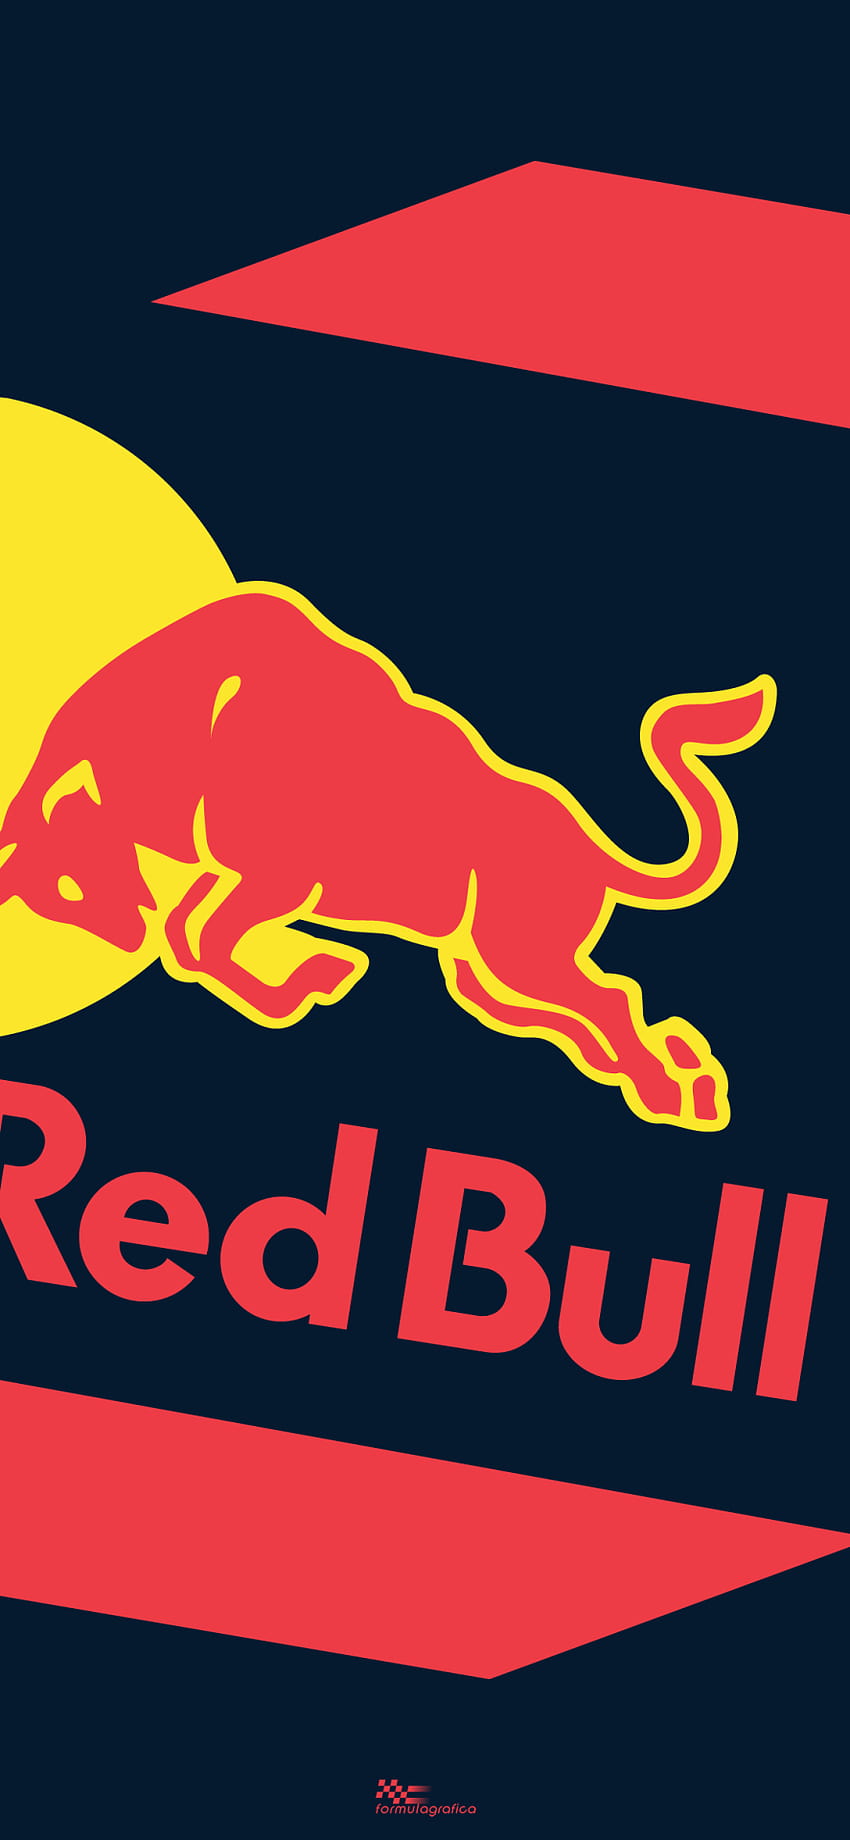 Red Bull posted by Ethan Andersoncute, red bull logo mobile HD phone wallpaper